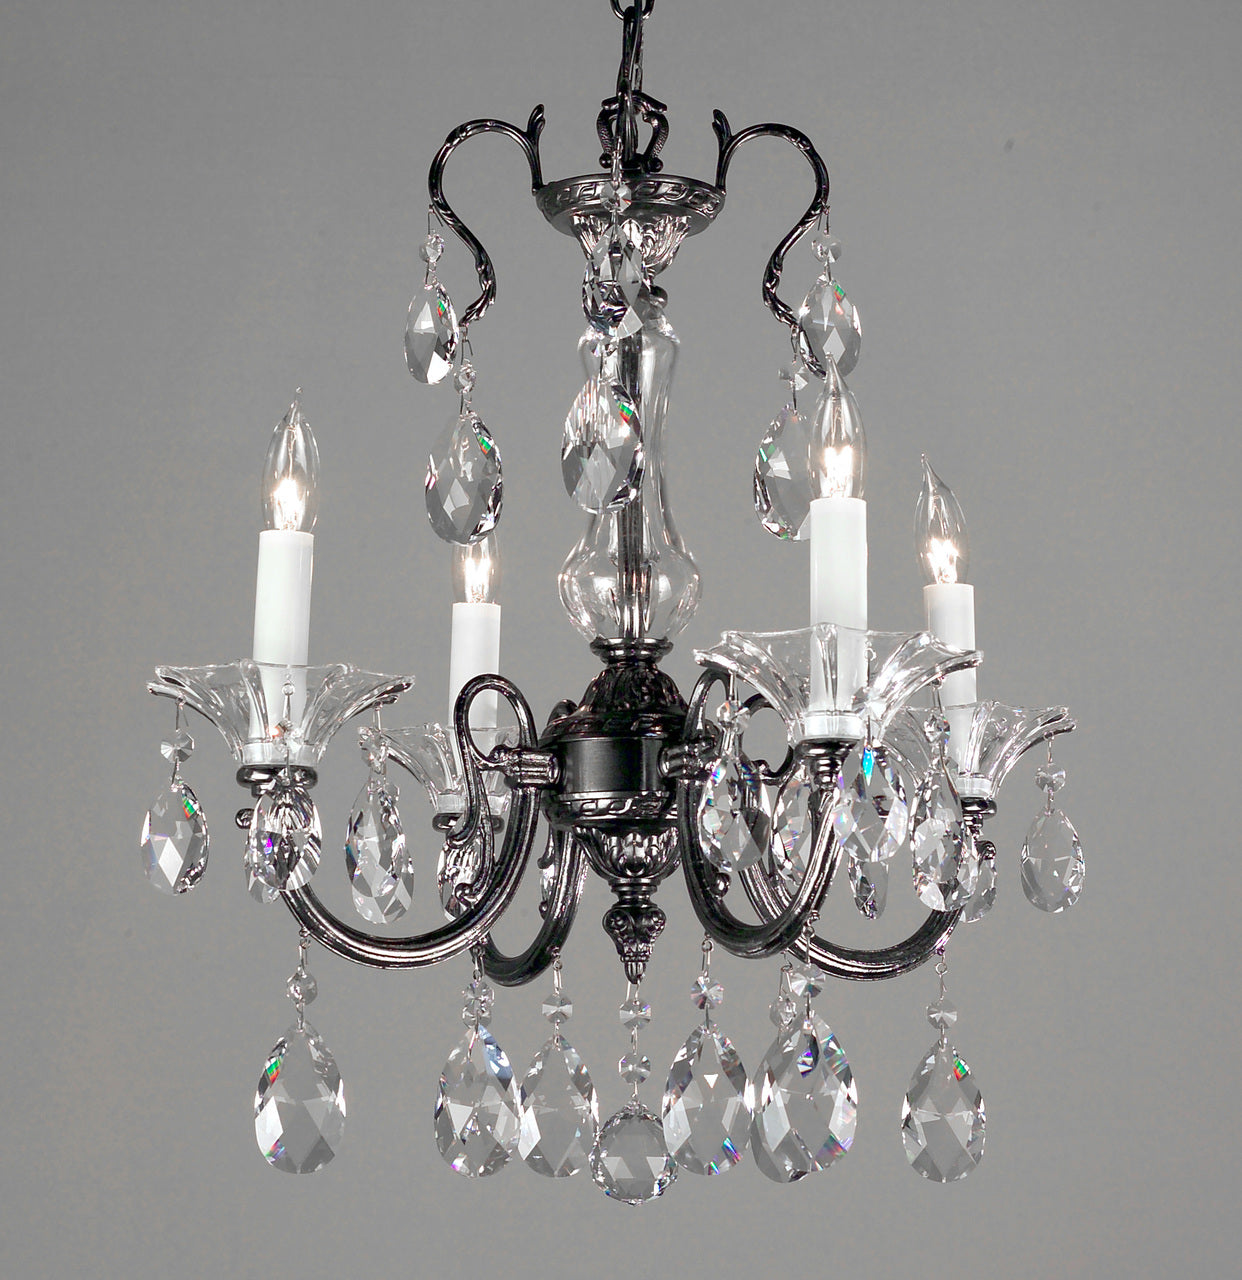 Classic Lighting 57054 EP CP Via Lombardi Crystal Mini Chandelier in Ebony Pearl (Imported from Spain)